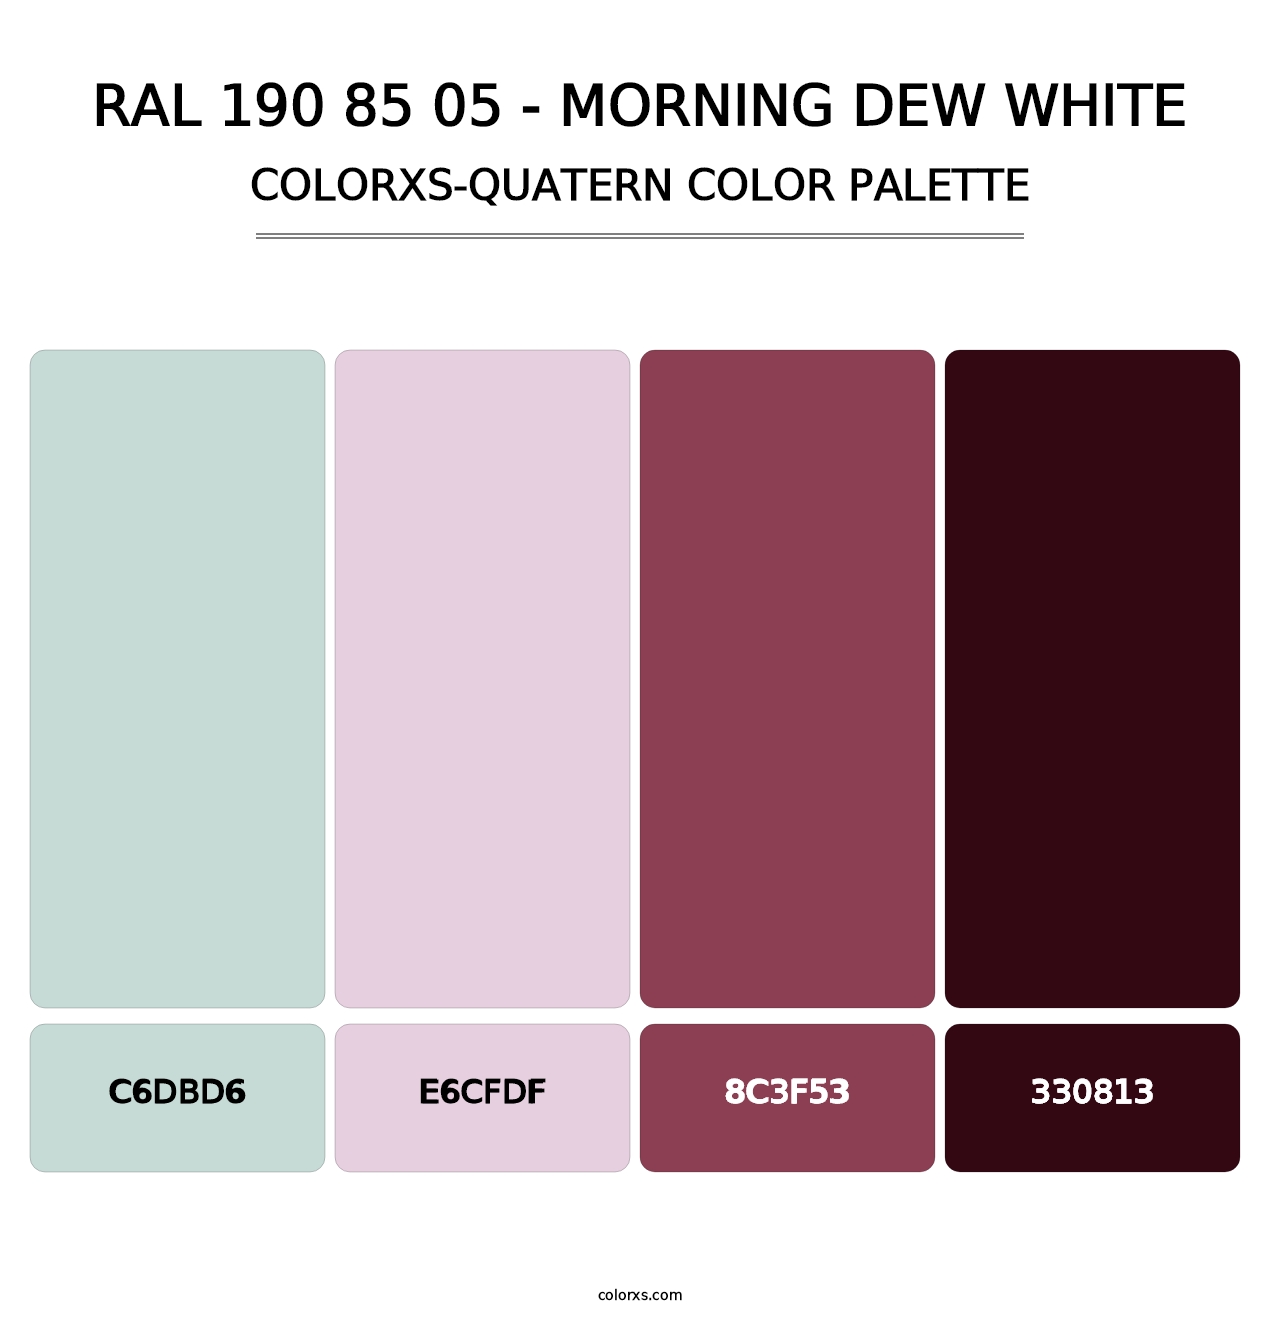 RAL 190 85 05 - Morning Dew White - Colorxs Quatern Palette